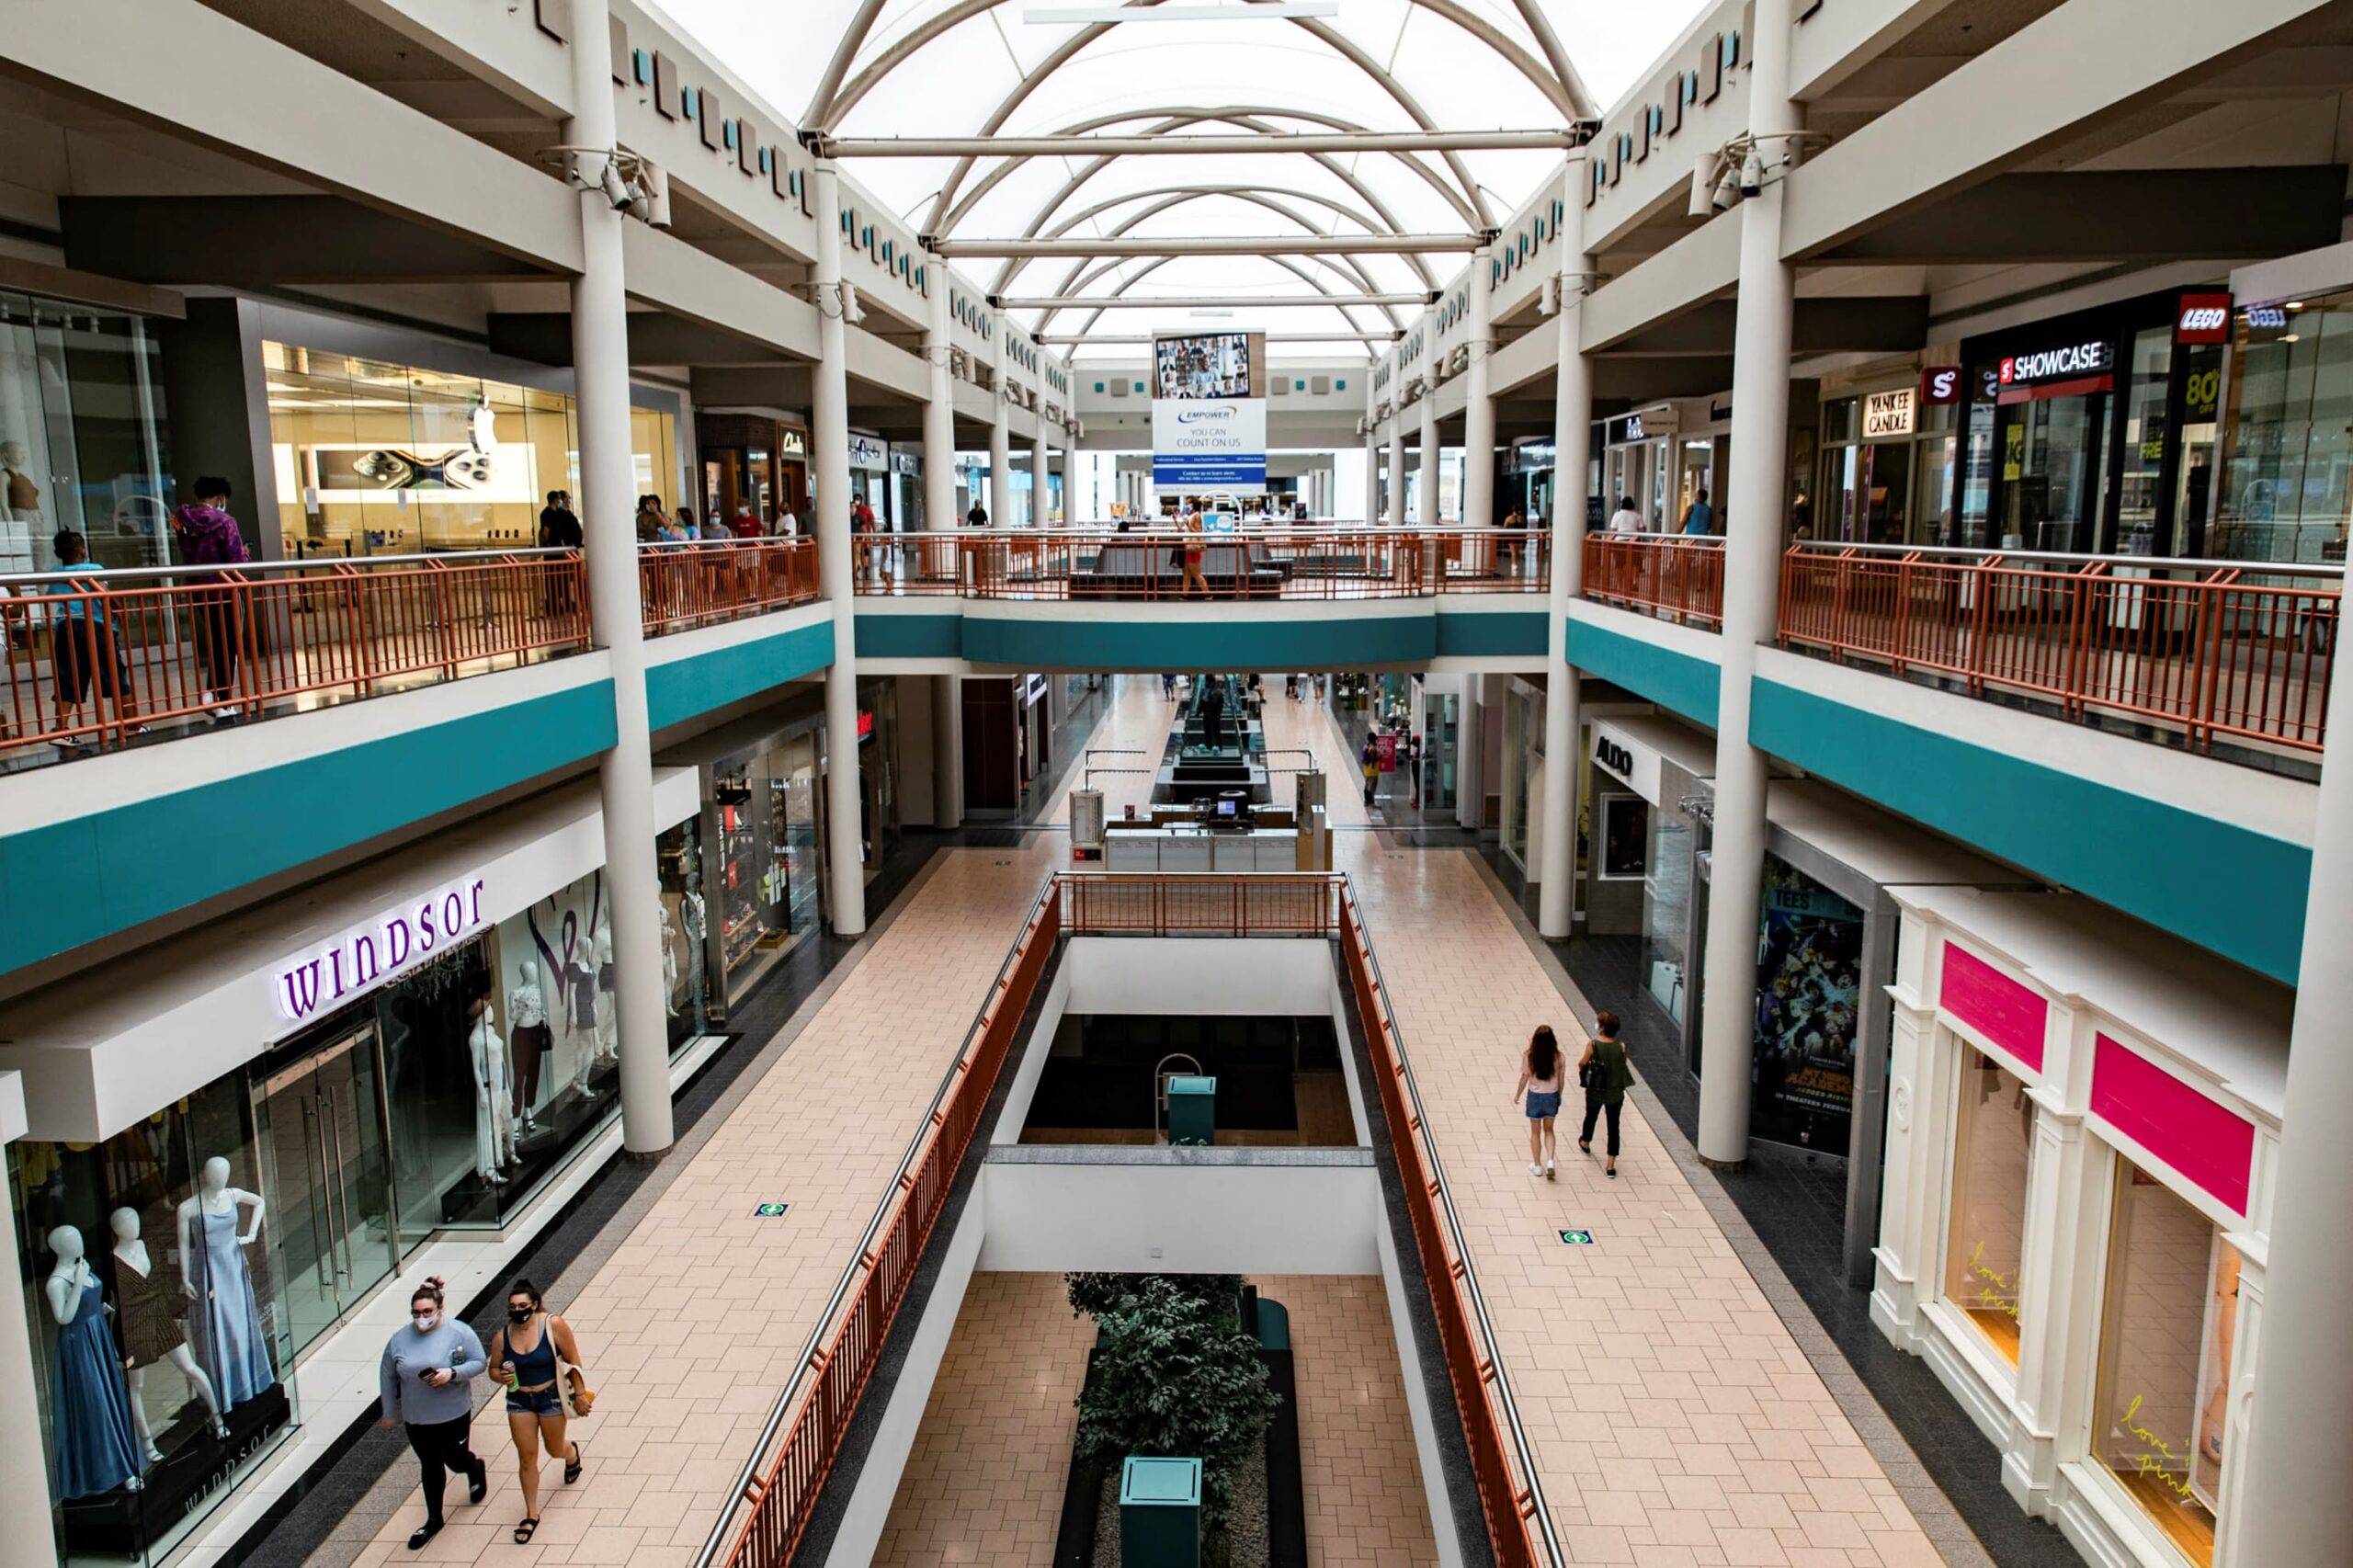 Malls and High Streets, Two To Exist Together to Fulfill Consumer Needs